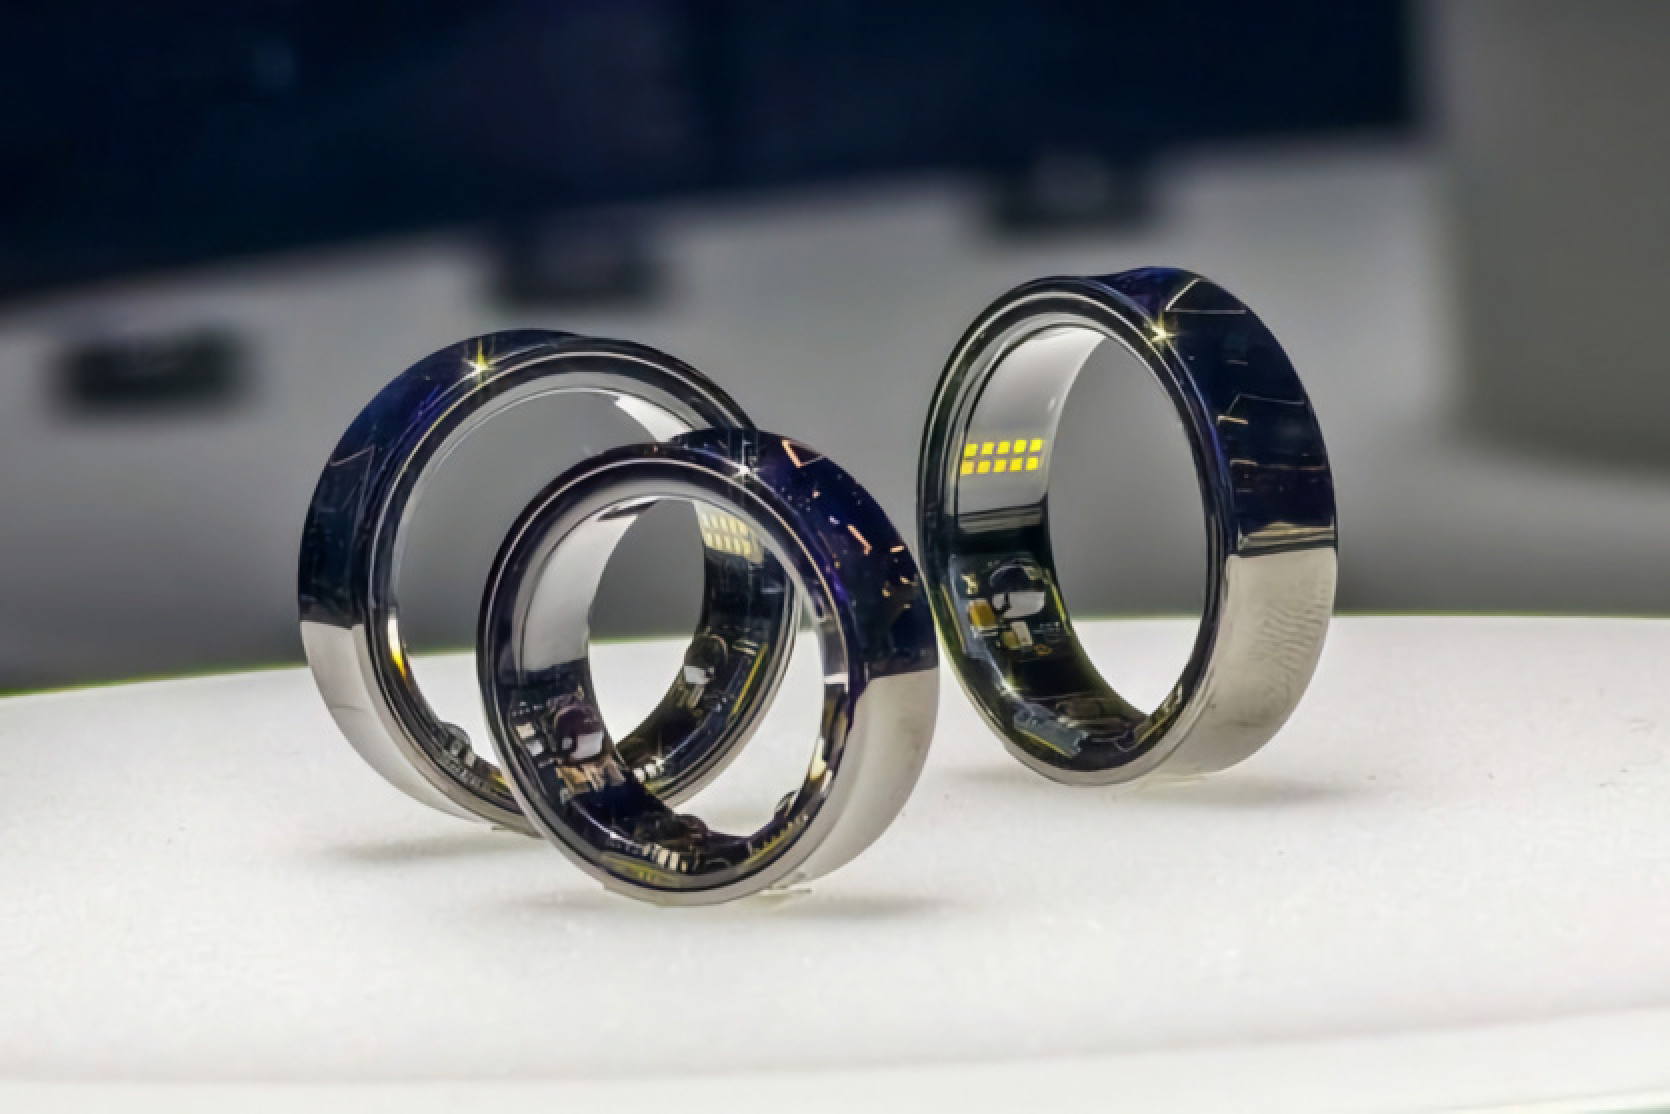 Samsung Galaxy Ring will cost from $300, the company will offer subscription-based usage - unofficially